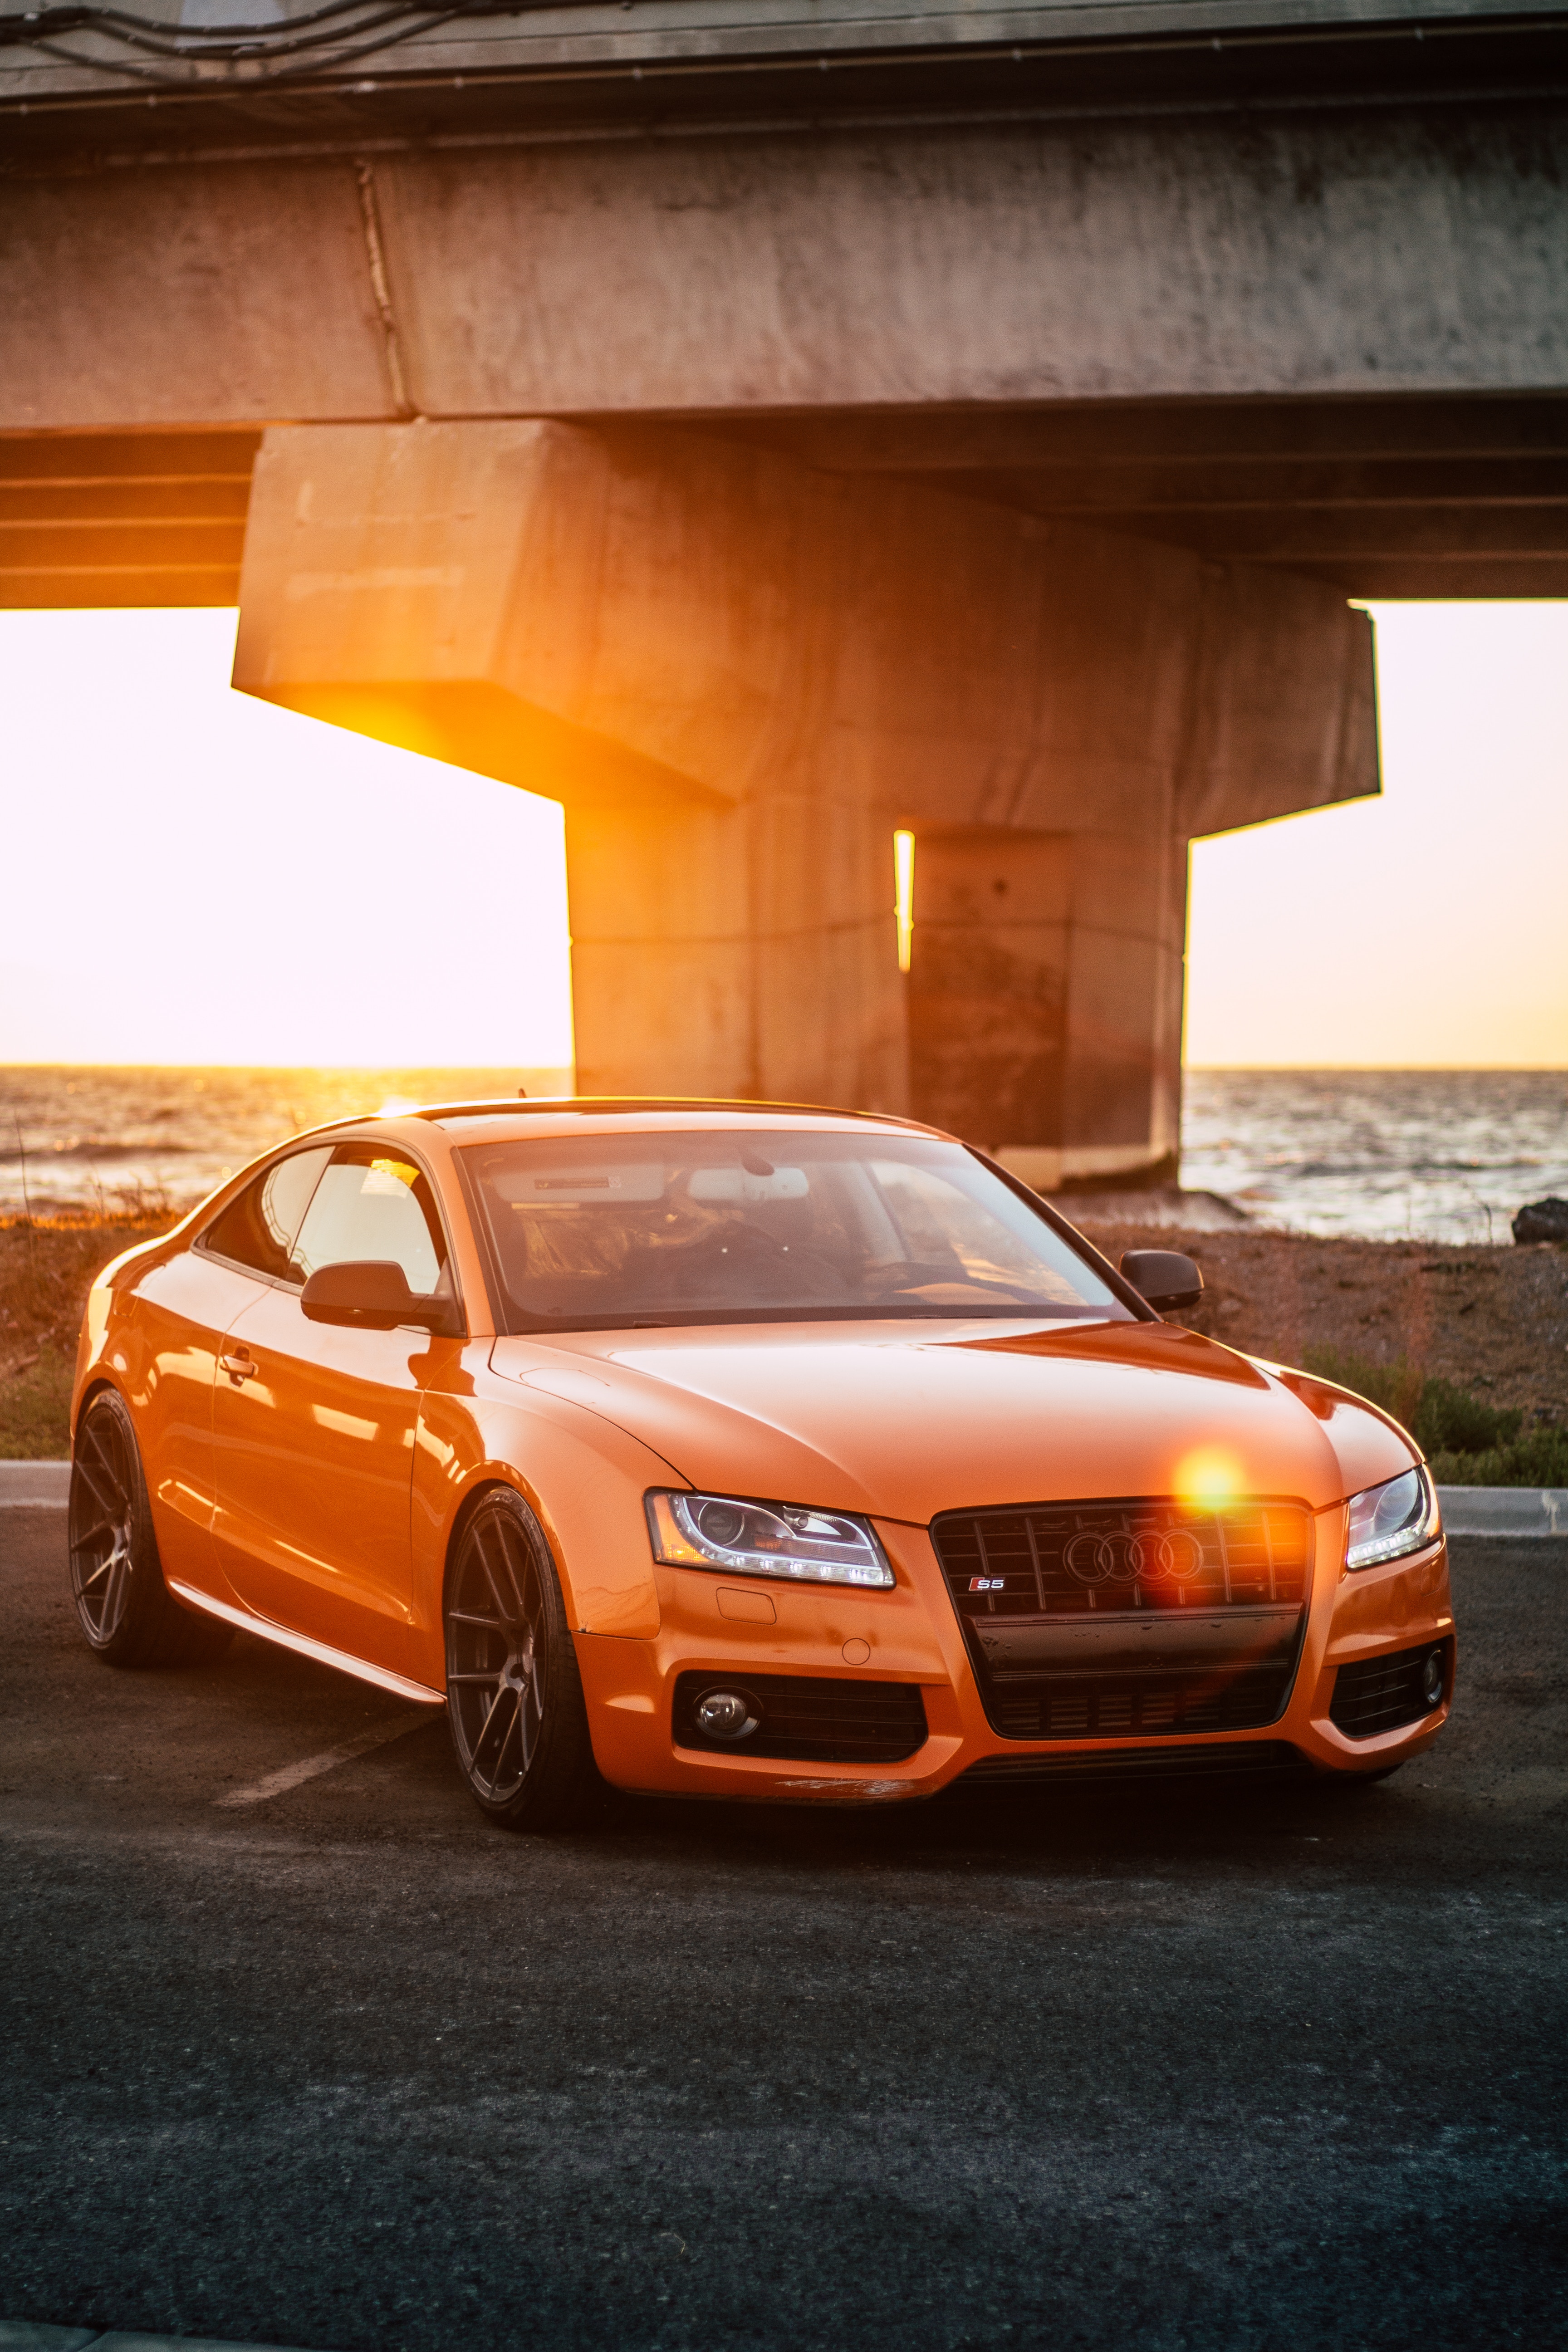 Cool Wallpapers side view, auto, cars, orange, glare, shine, light